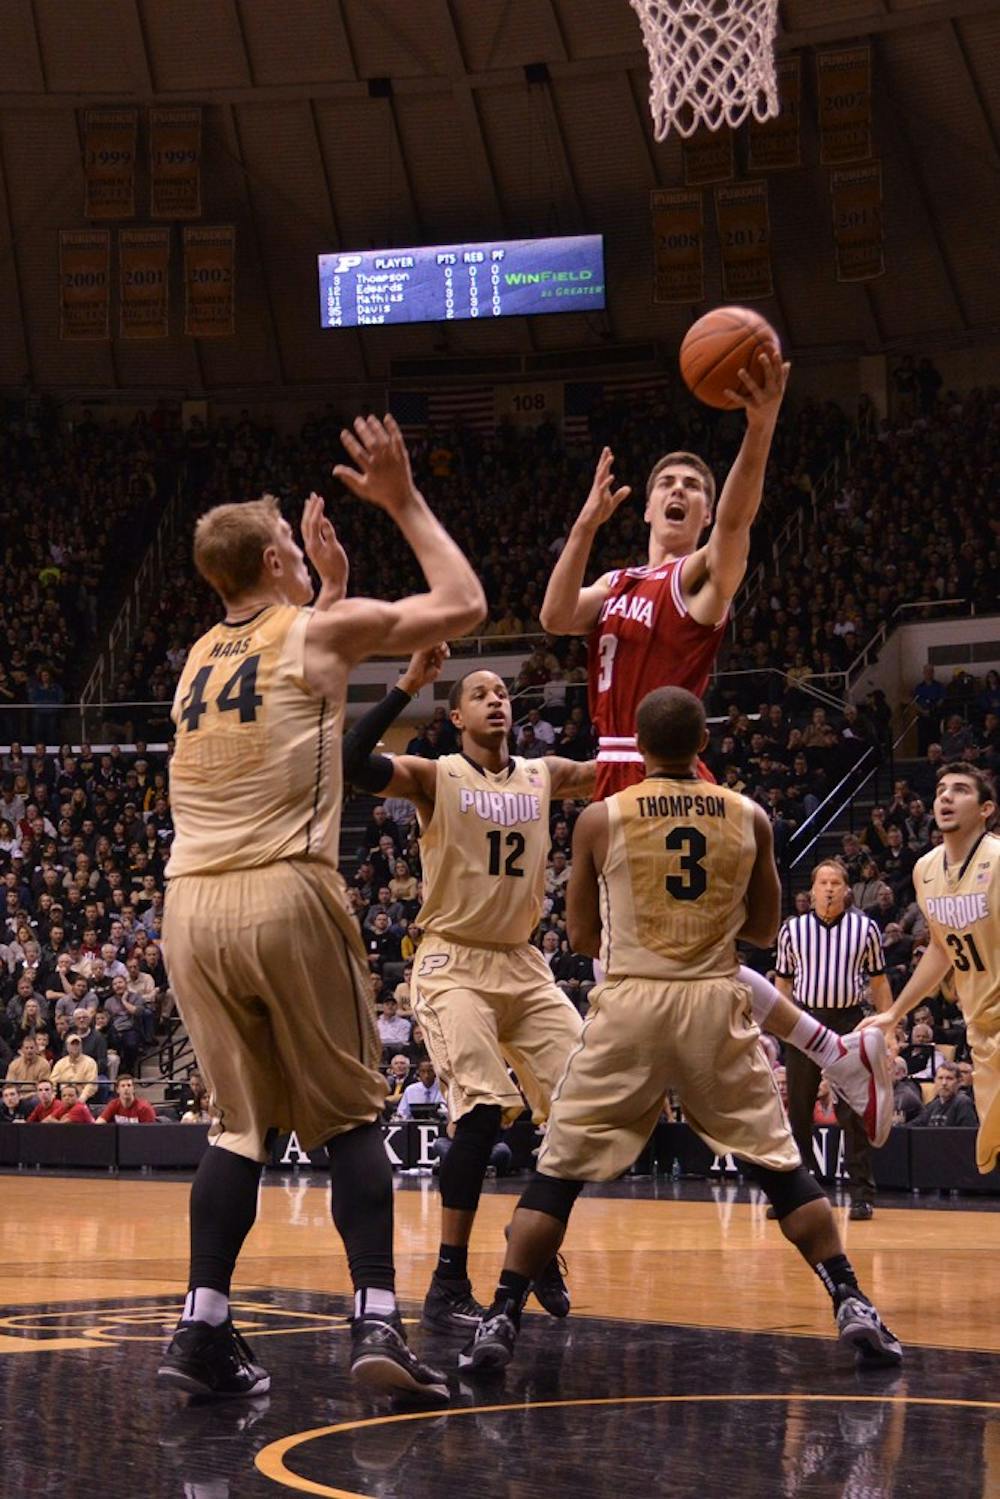 Freshman Max Hoetzel attempts a layup surronded by three Purdue players Wednesday night at Mackey Arena.